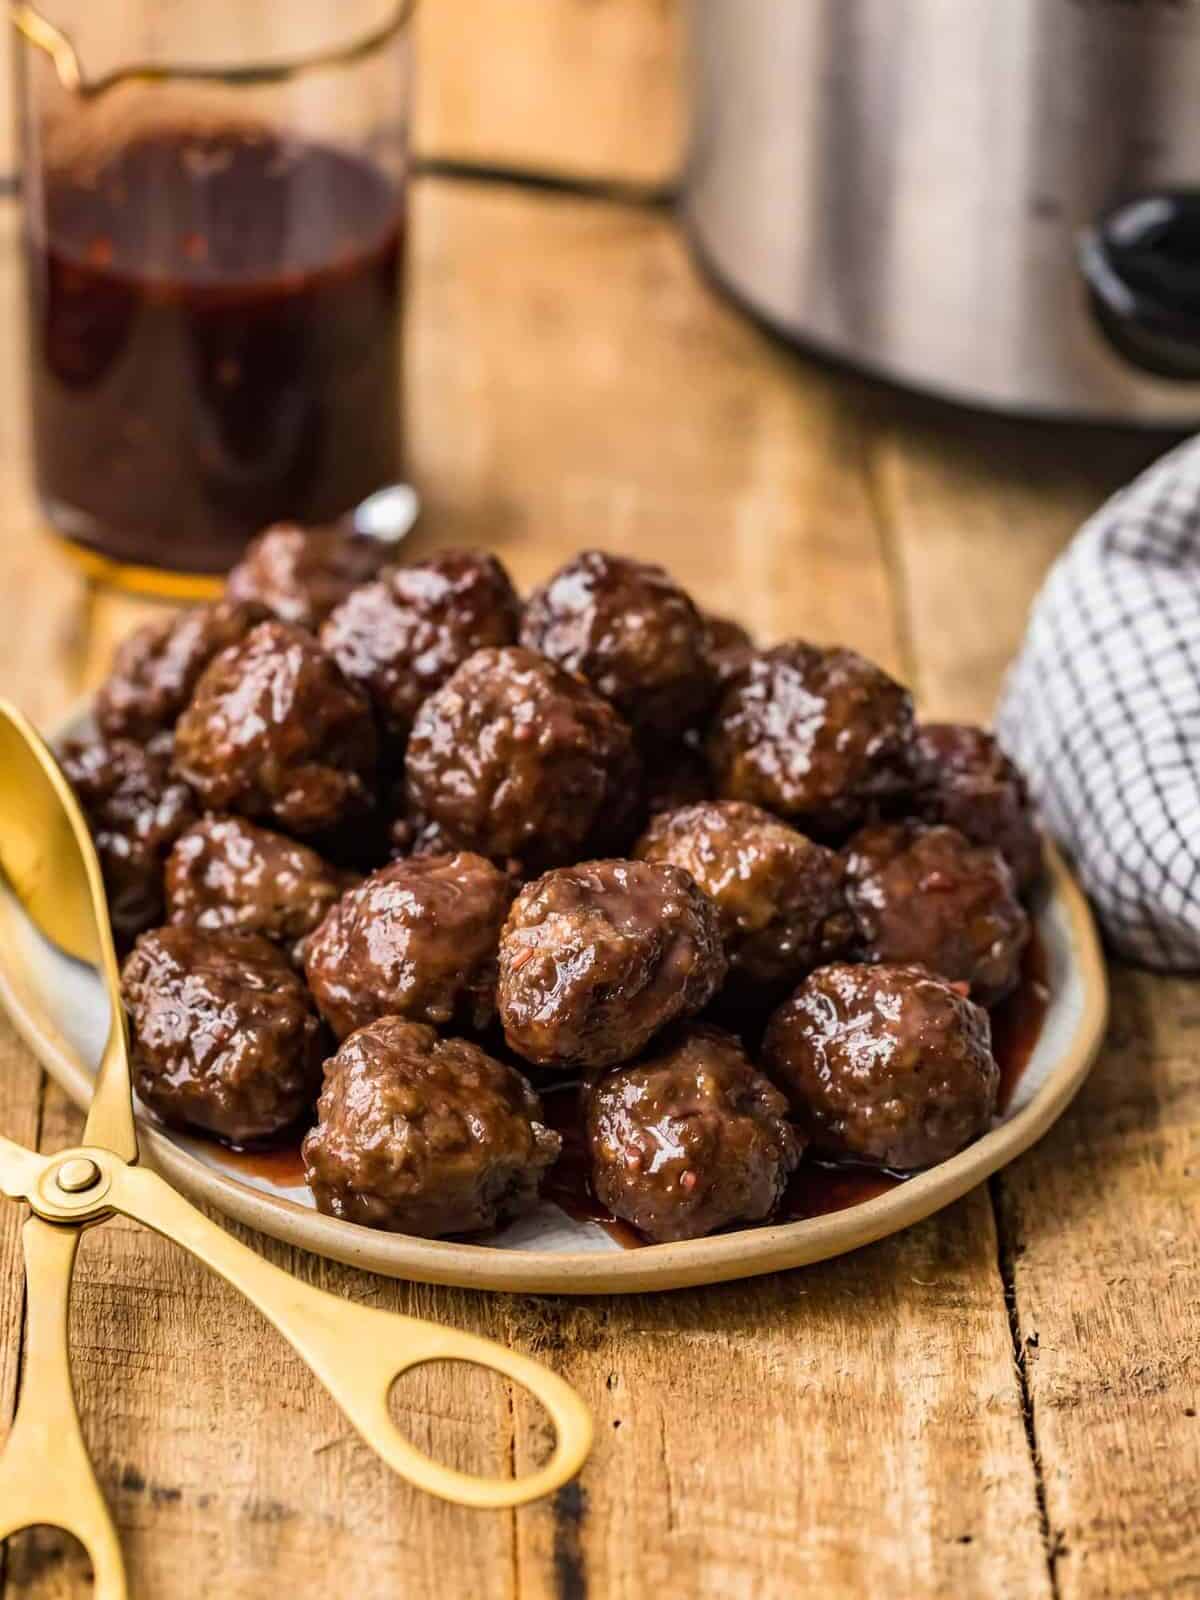 Grape jelly meatballs served on a plate.